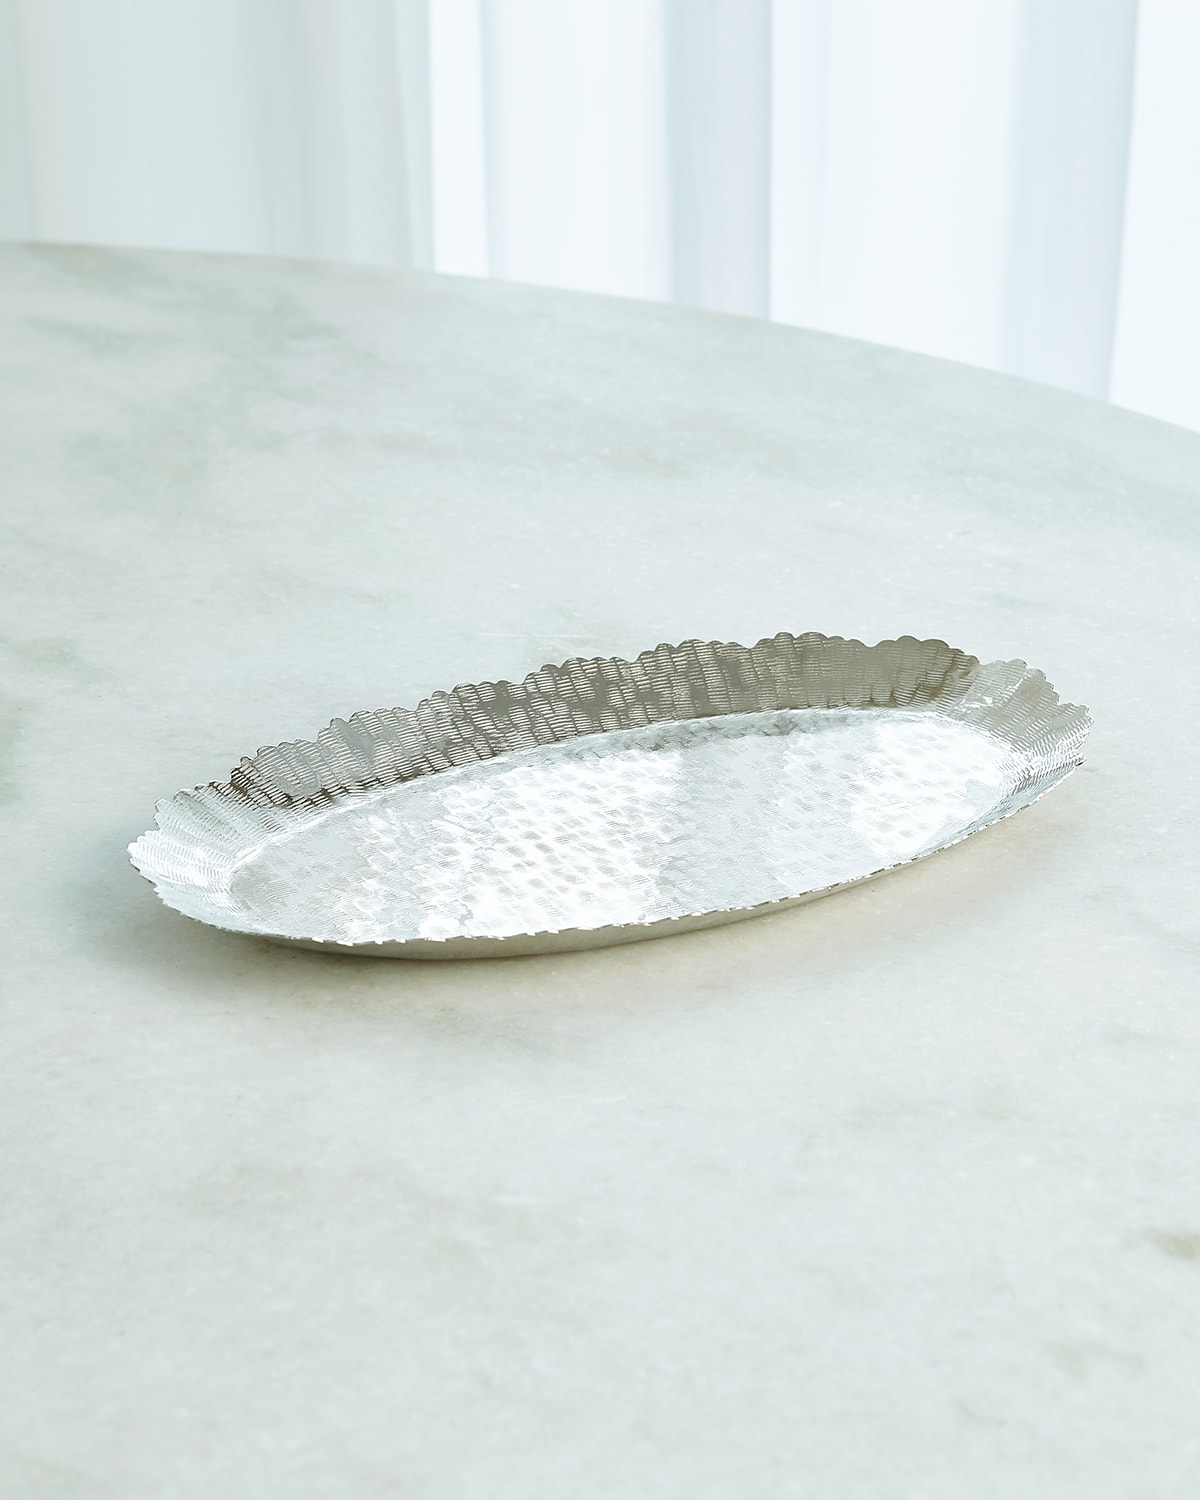 William D Scott Small Hammered Oval Tray